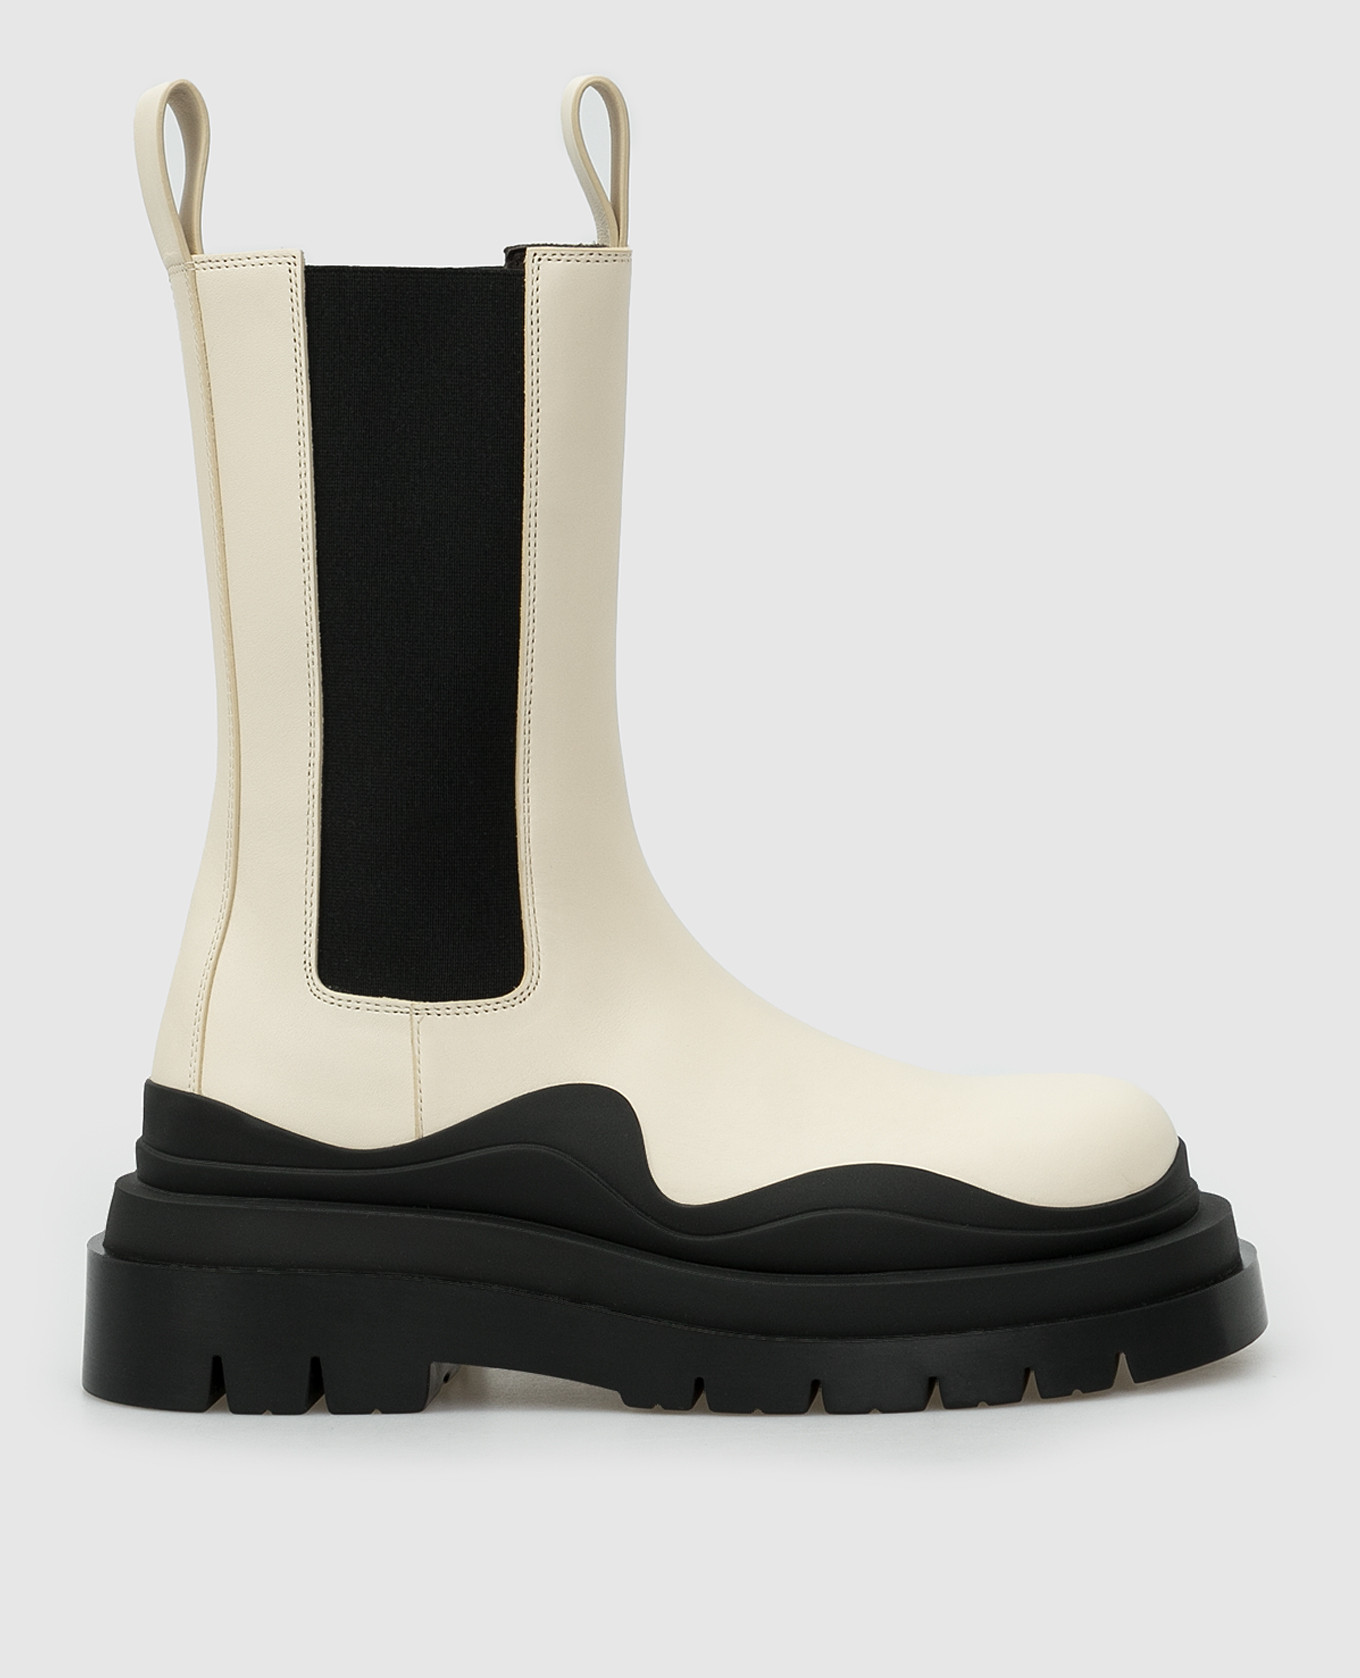 Chelsea high boots "BV Tire"